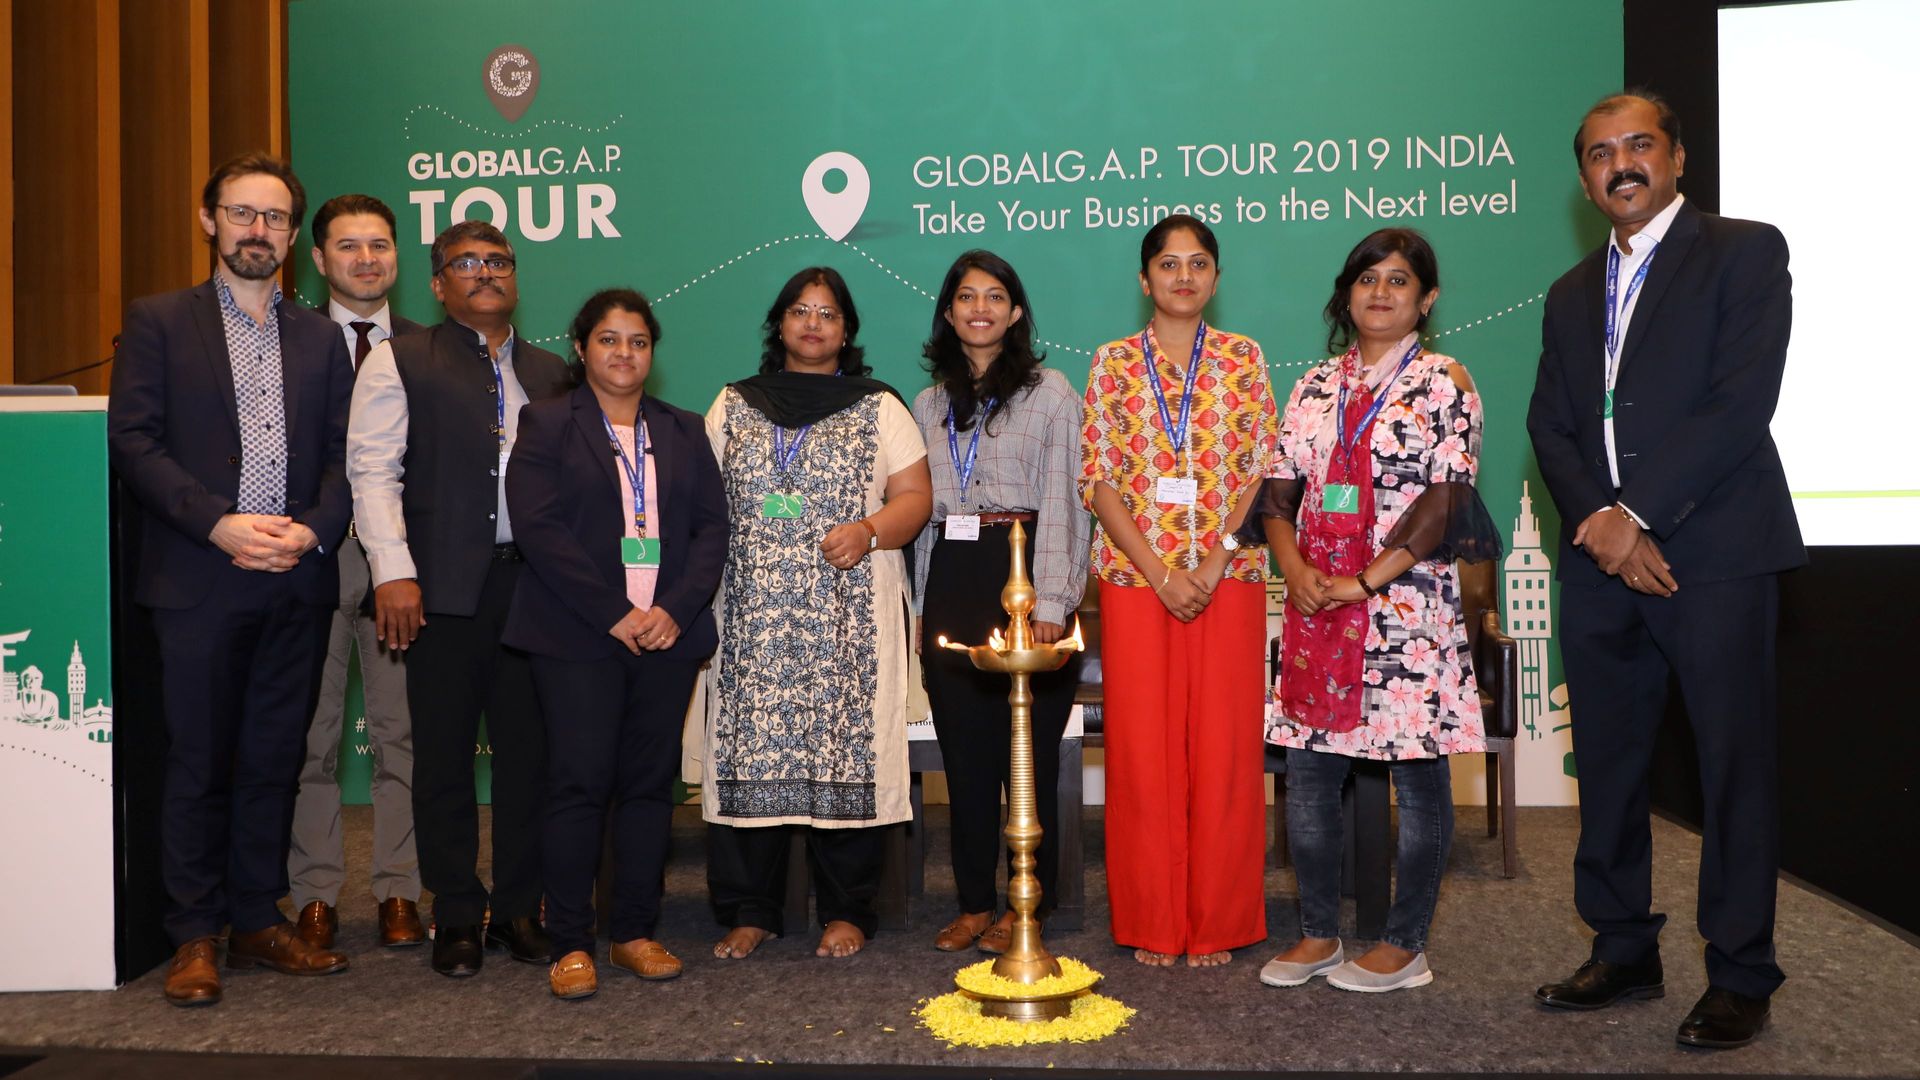 Image of participants at the 2019 TOUR stop in India